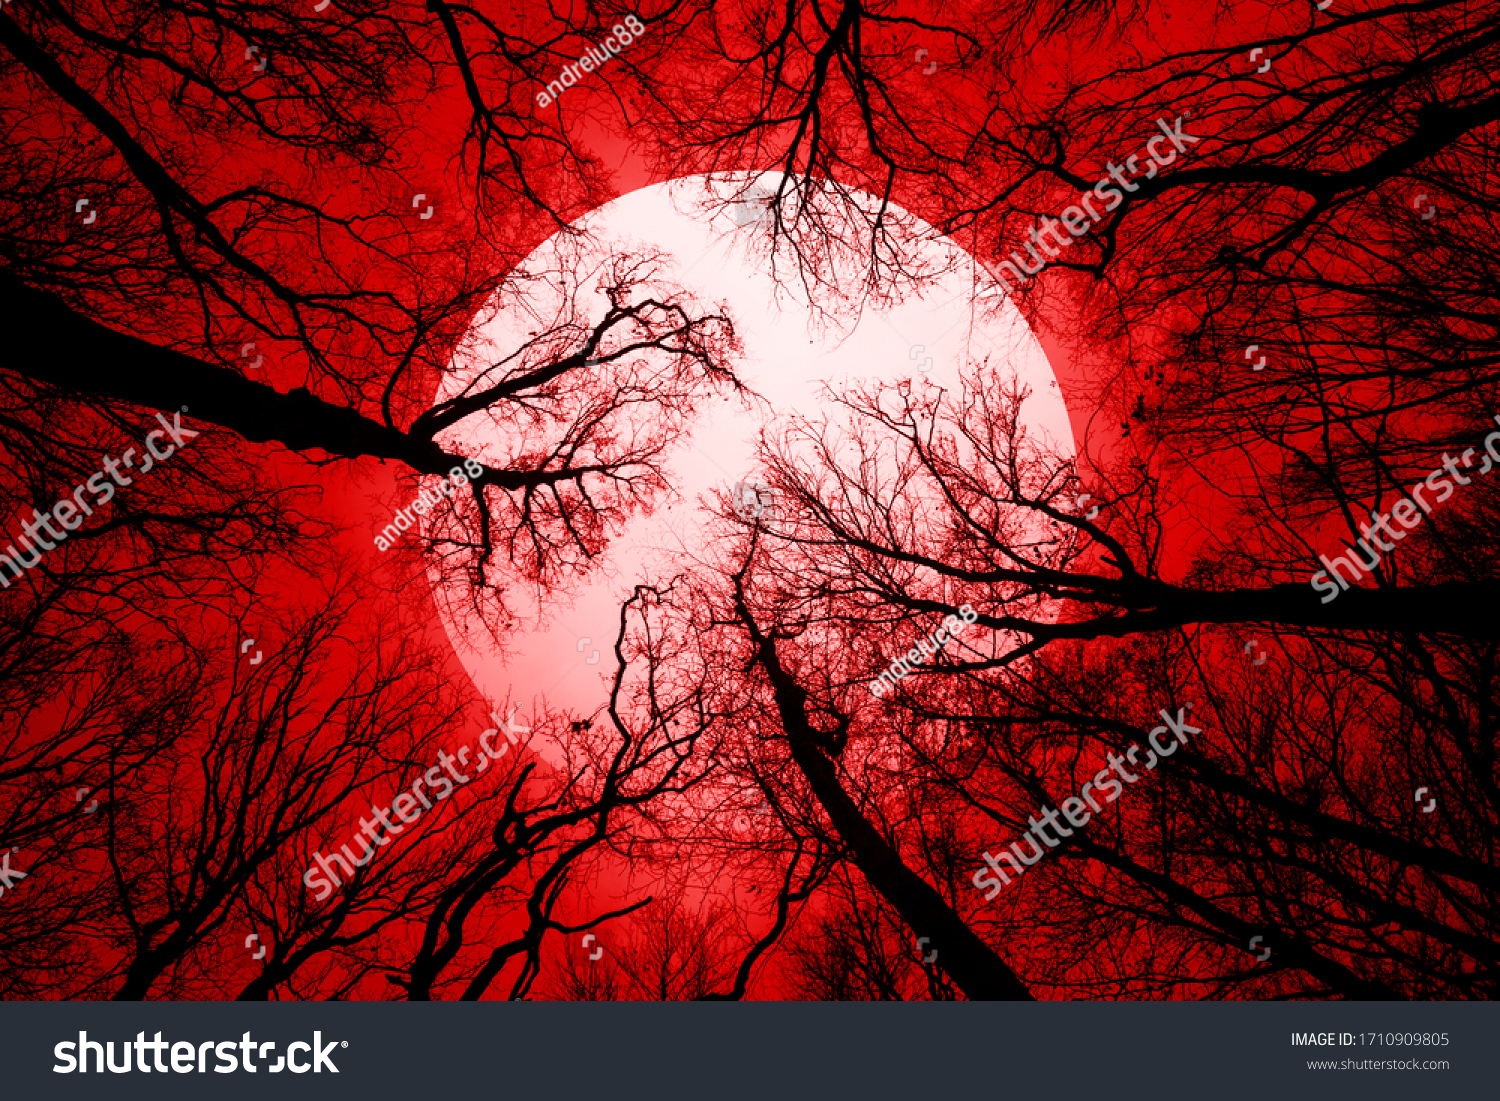 horror forest background, full moon above trees, apocalyptic scene #1710909805